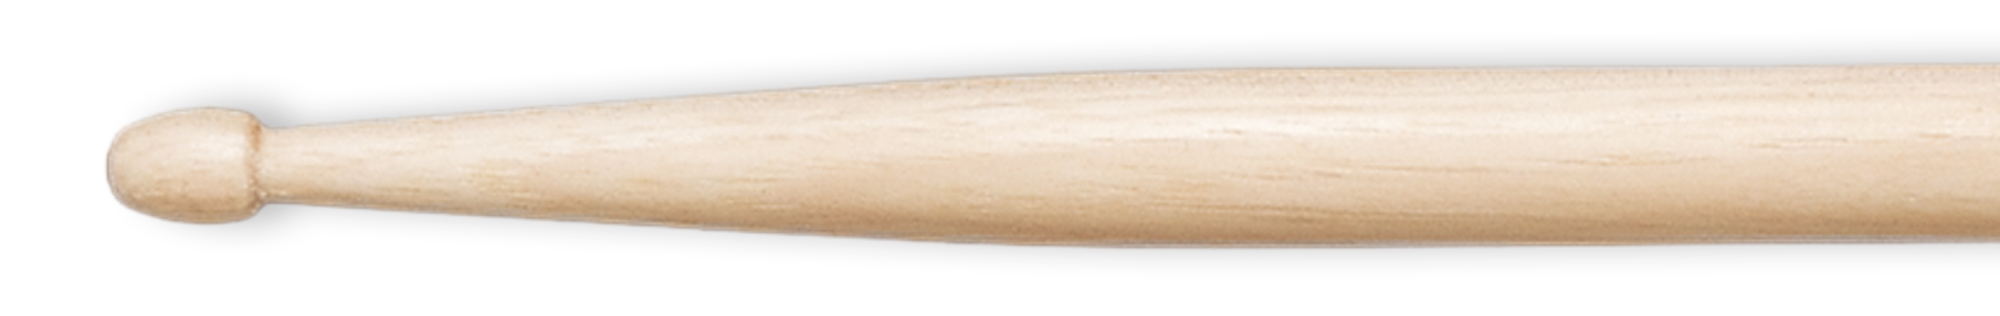 Vic Firth 5A American Hickory Wood Tip